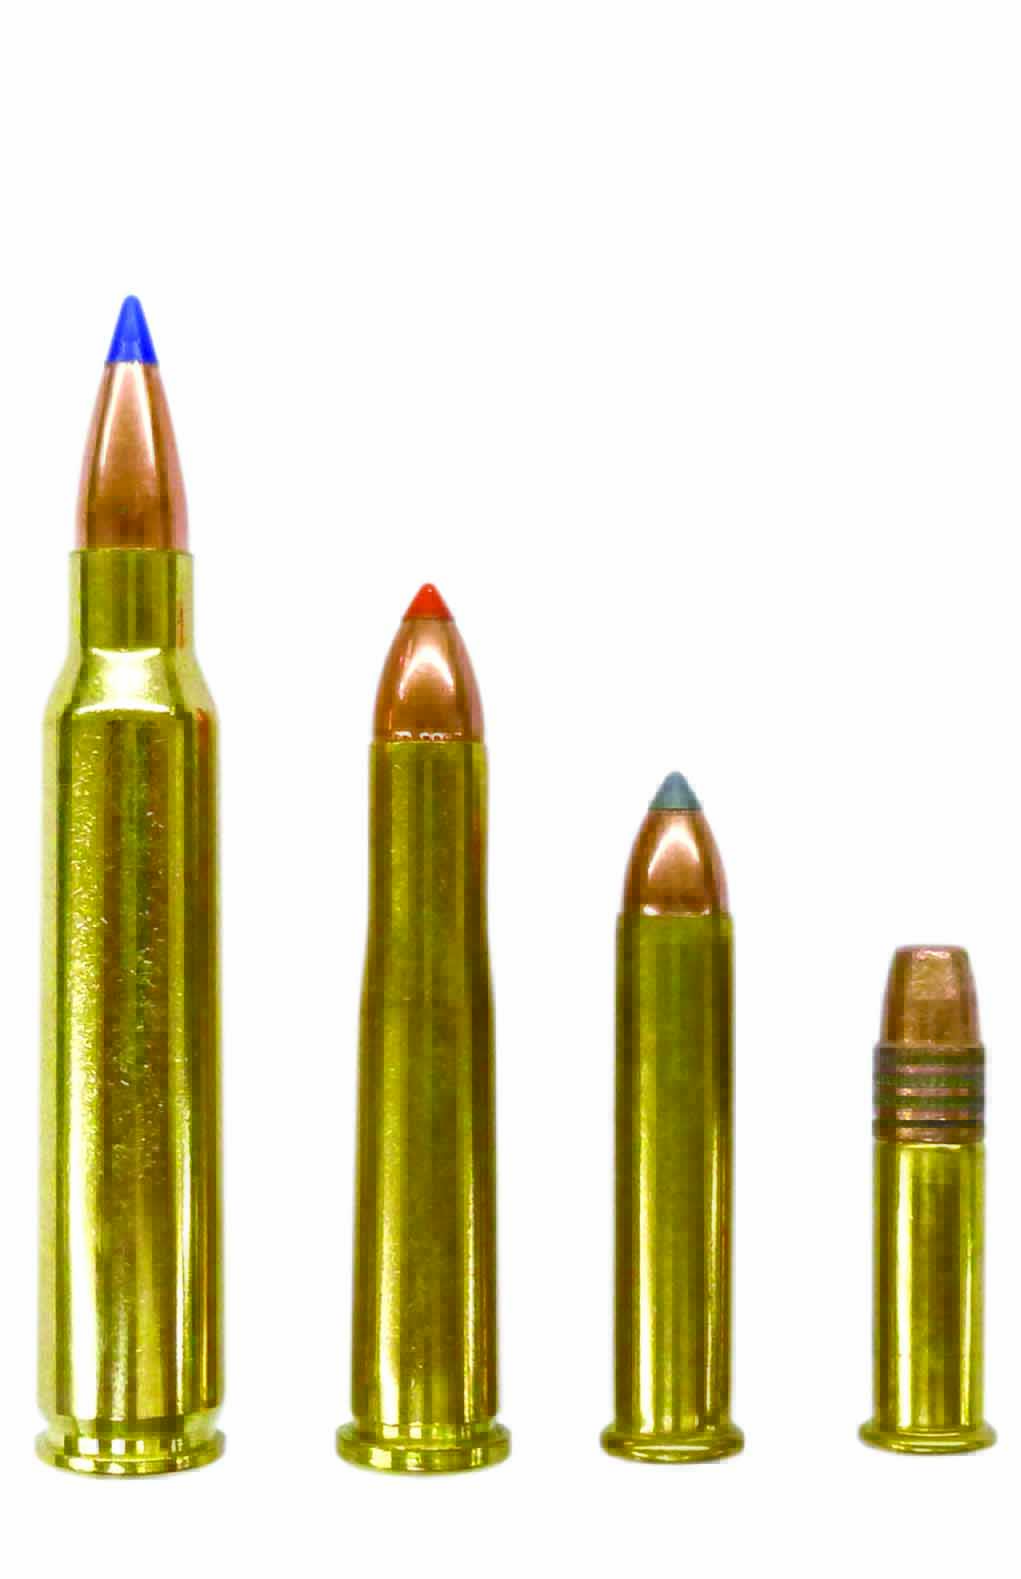 By careful loading, the .223 Remington can duplicate the performance of the...